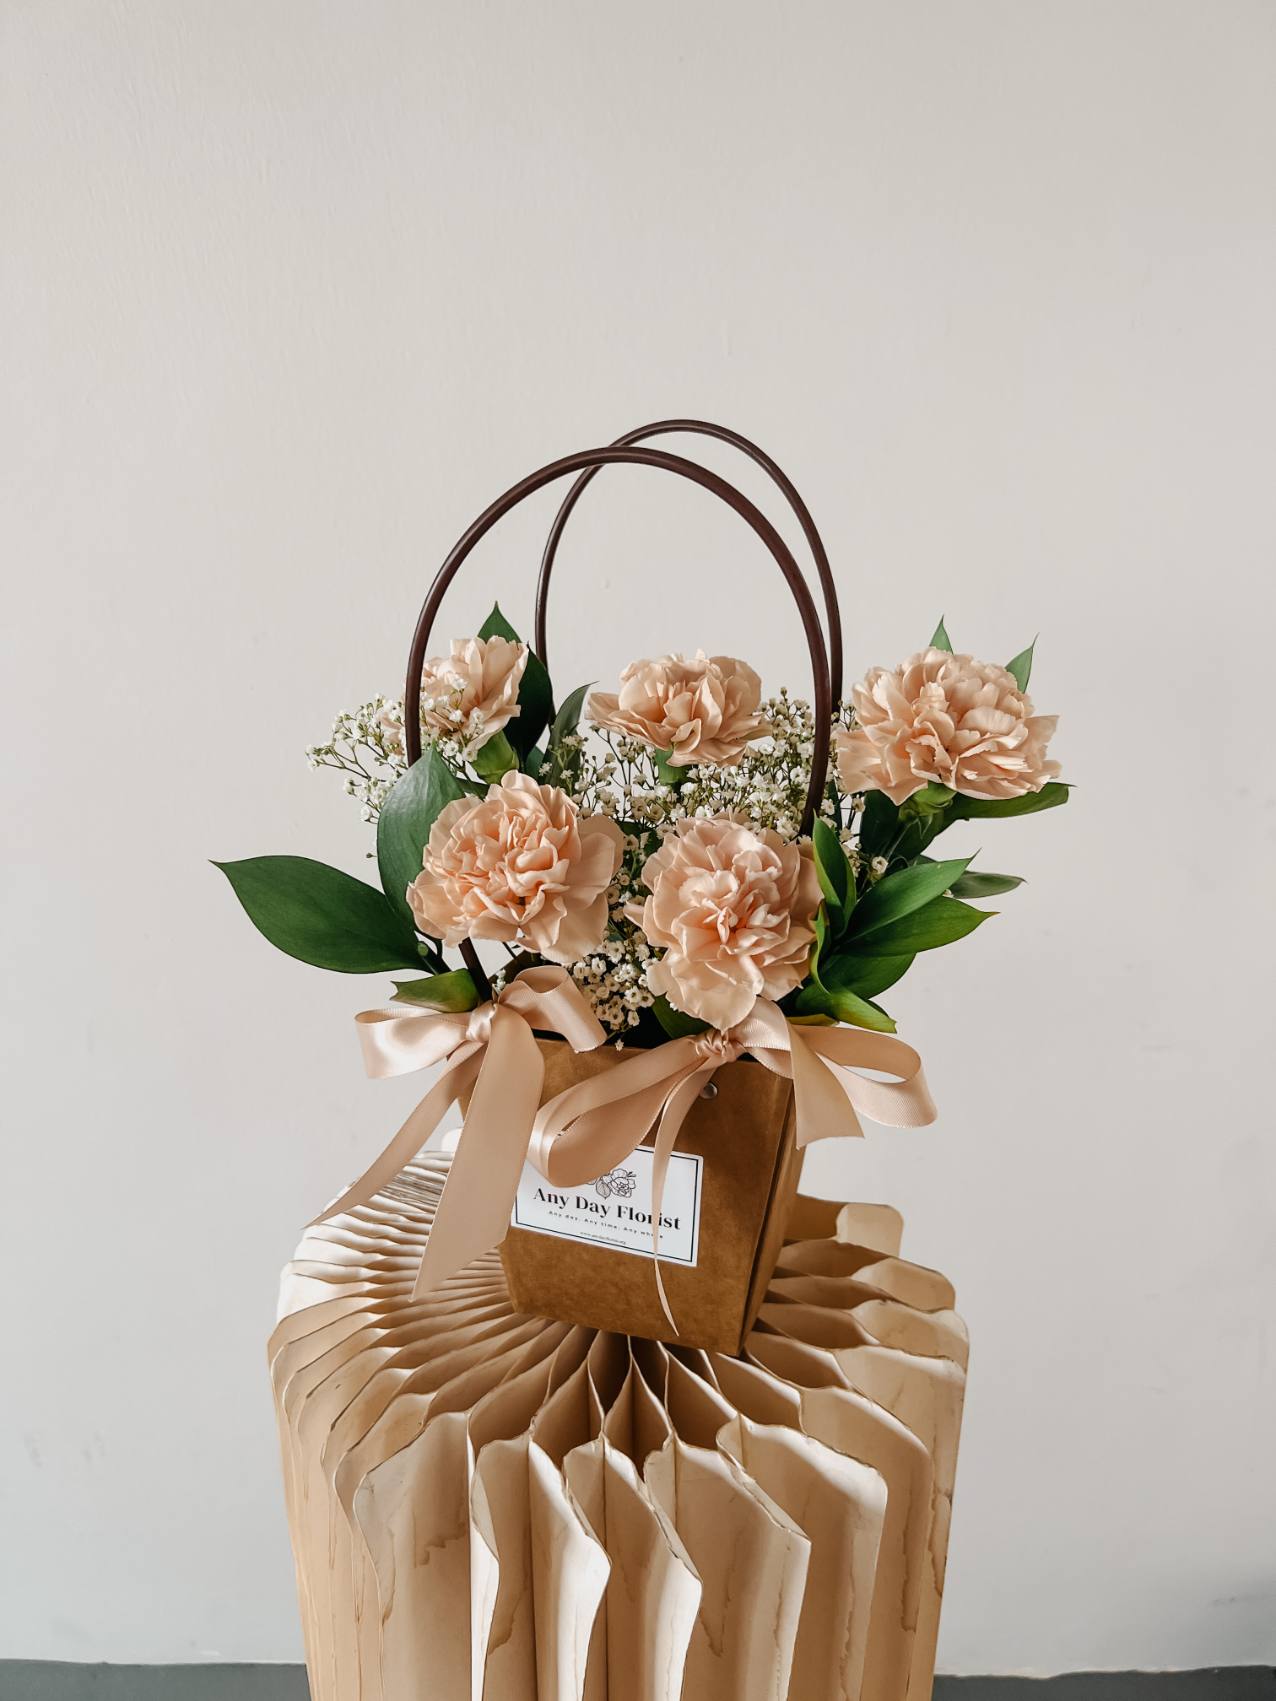 Any Day FloristPerfect Ocassion for: Birthday, Mother's Day, Monthsary.
*Do note that fresh flowers, fillers &amp; foliage are seasonal and are subjected to changes based on availaChampagne | Carnation Bloom Bag